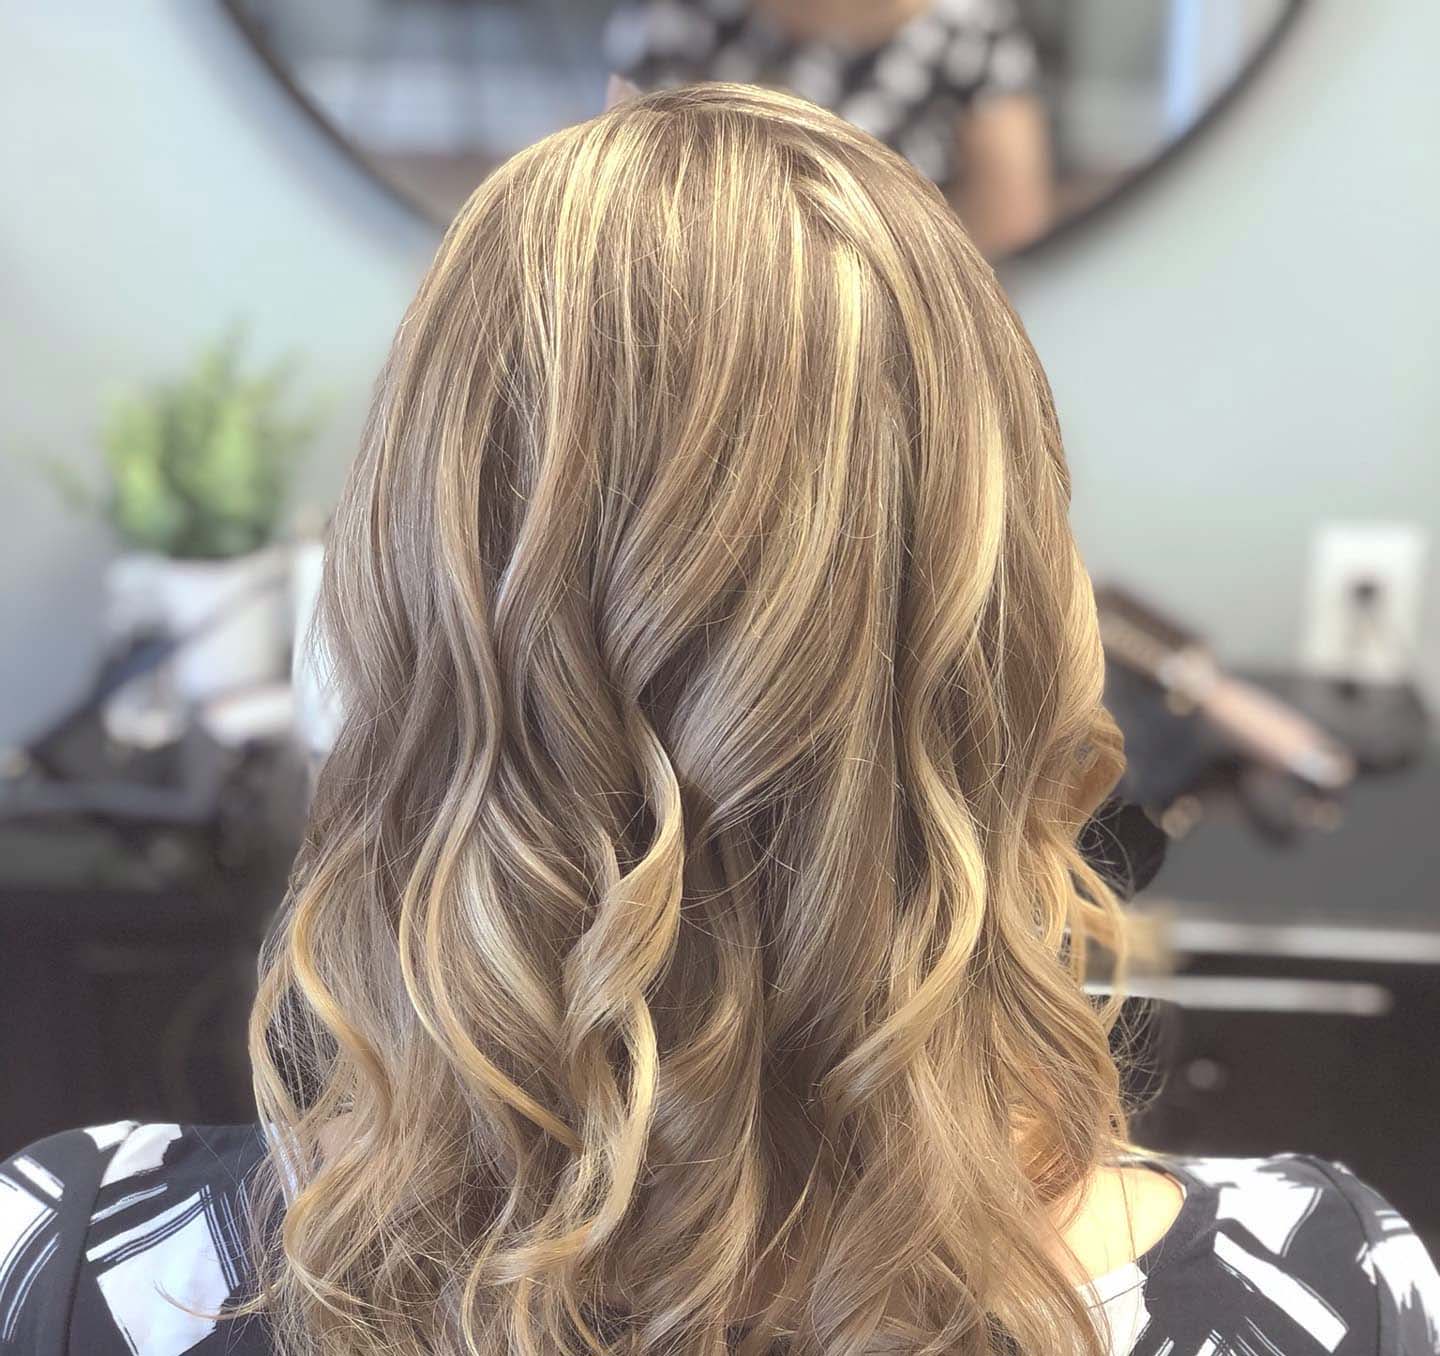 Blonde highlights done by Bloom Hair Boutique